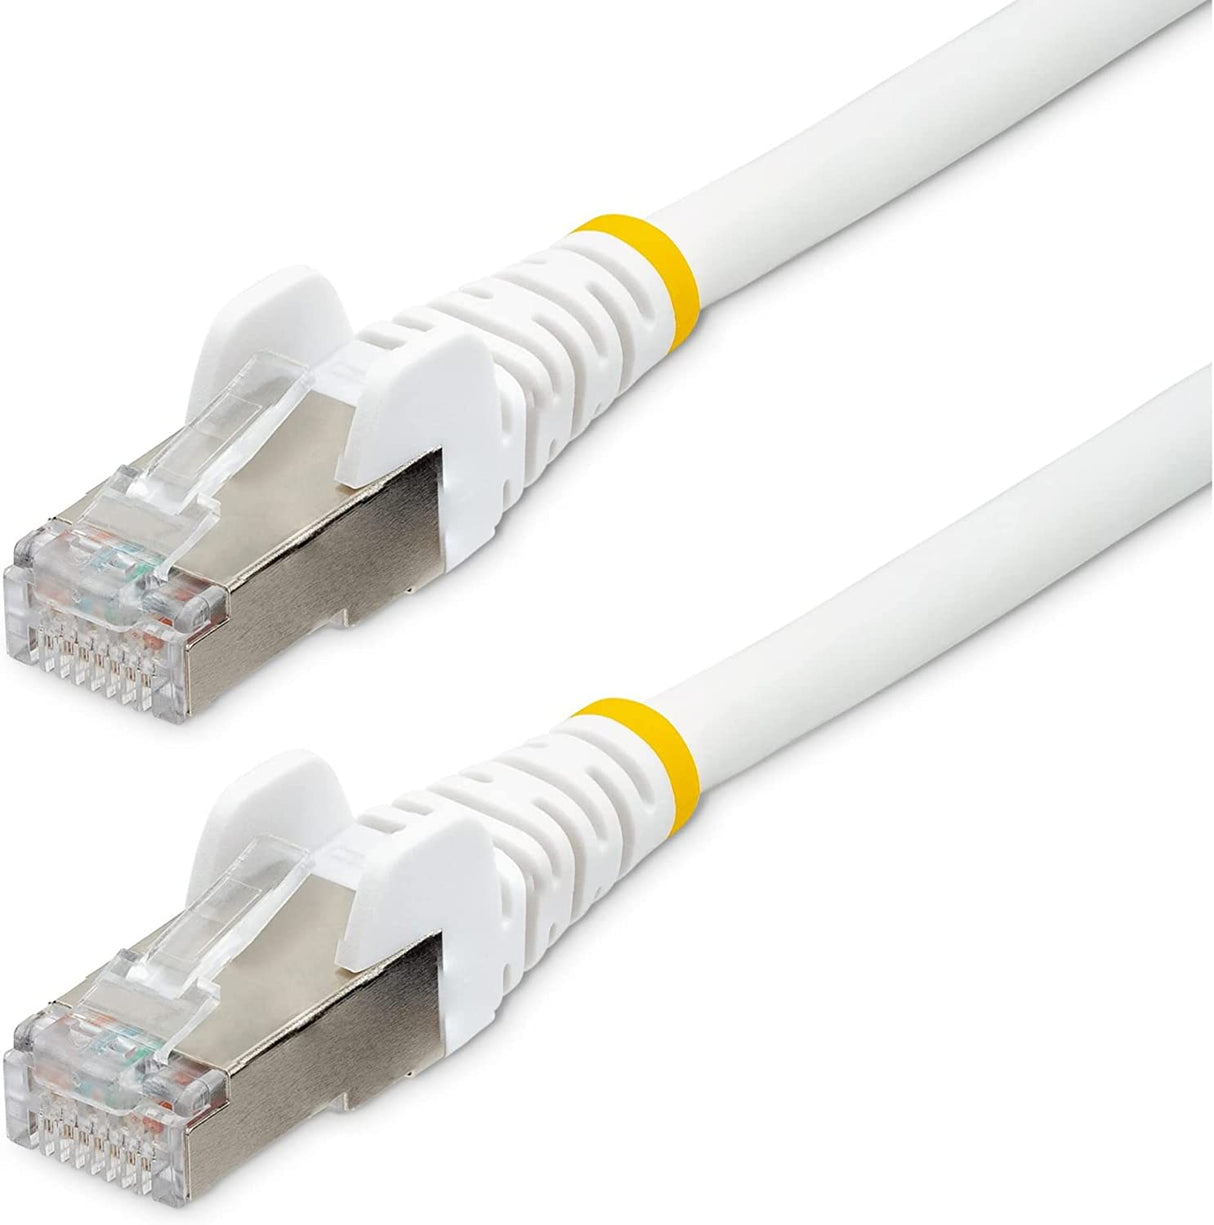 StarTech.com 15ft CAT6a Ethernet Cable - Low Smoke Zero Halogen (LSZH) - 10 Gigabit 500MHz 100W PoE RJ45 S/FTP White Network Patch Cord Snagless w/Strain Relief (NLWH-15F-CAT6A-PATCH)